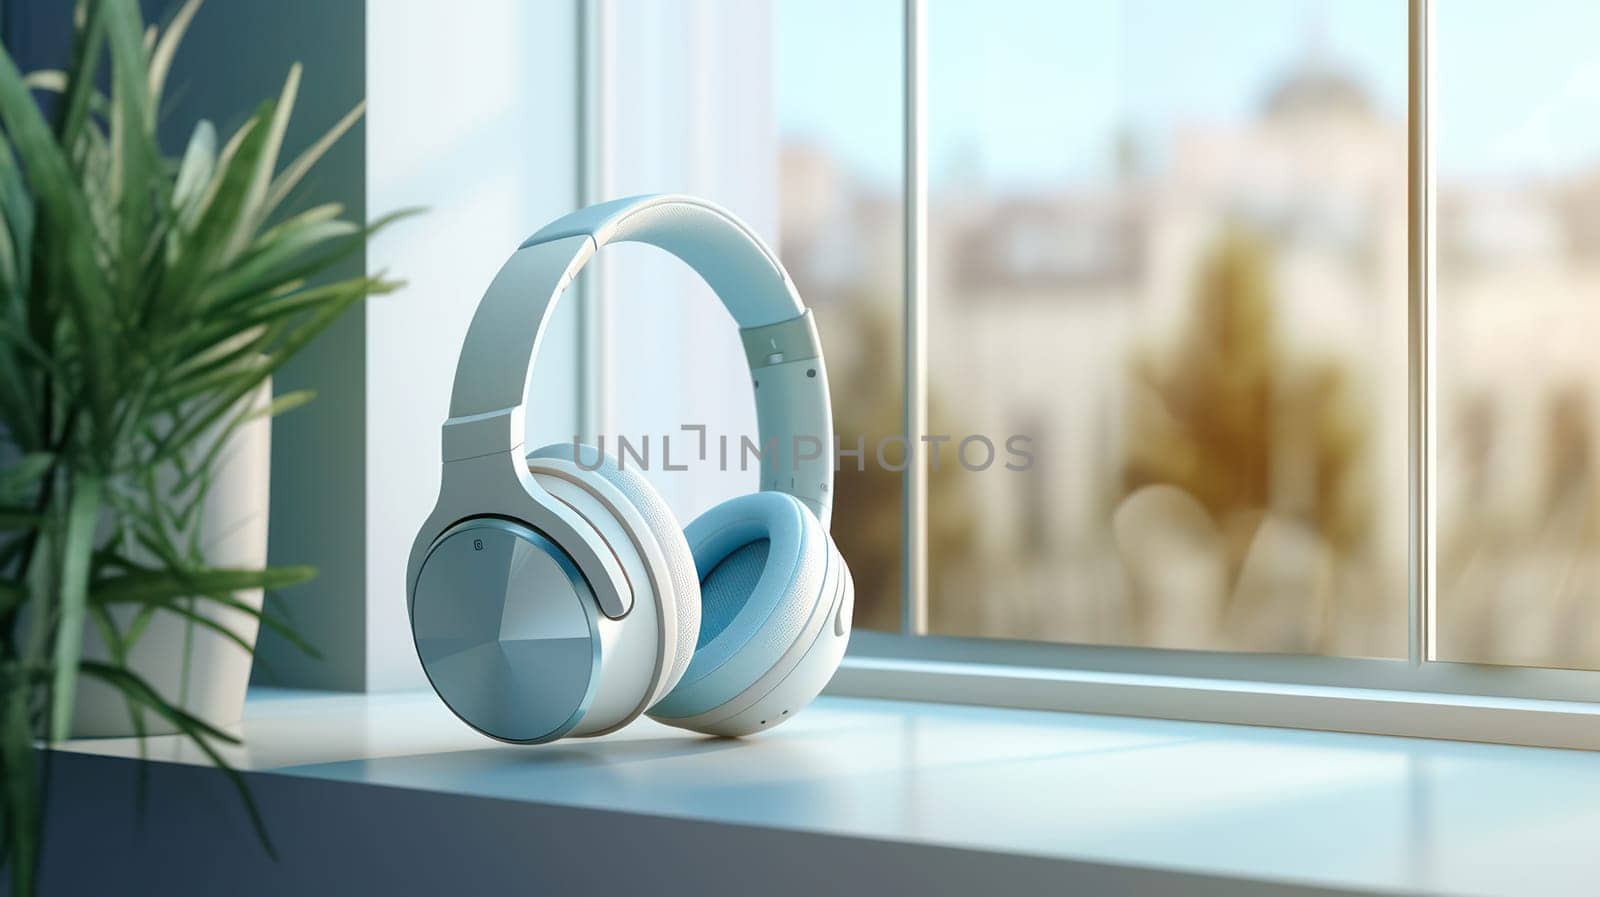 Modern Musical Entertainment: Isolated White Stereo Headset for Digital Audio Devices.